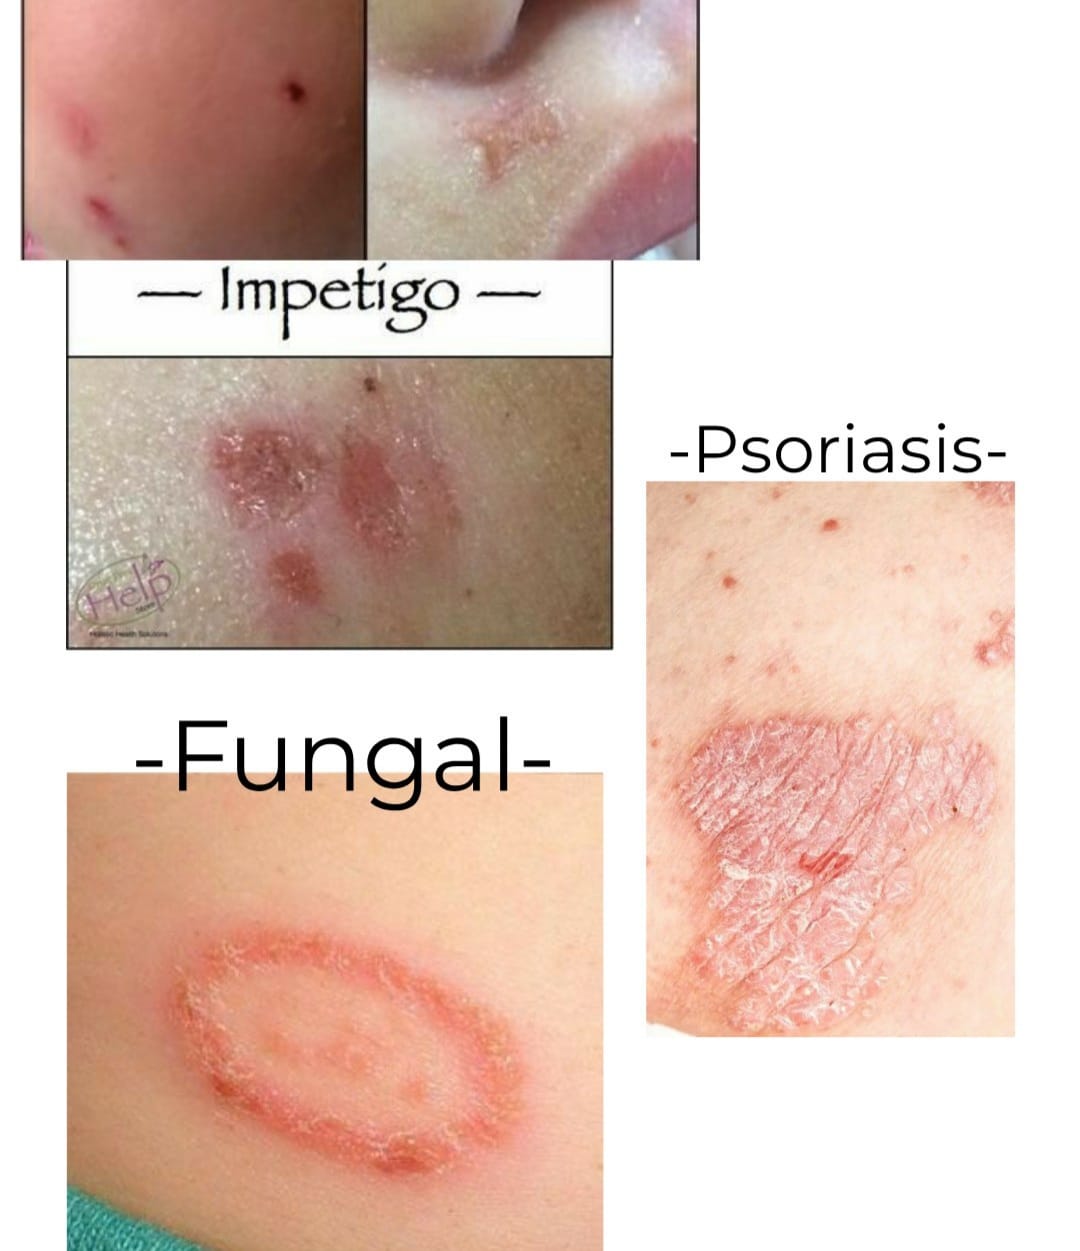 Is Psoriasis a Fungus?